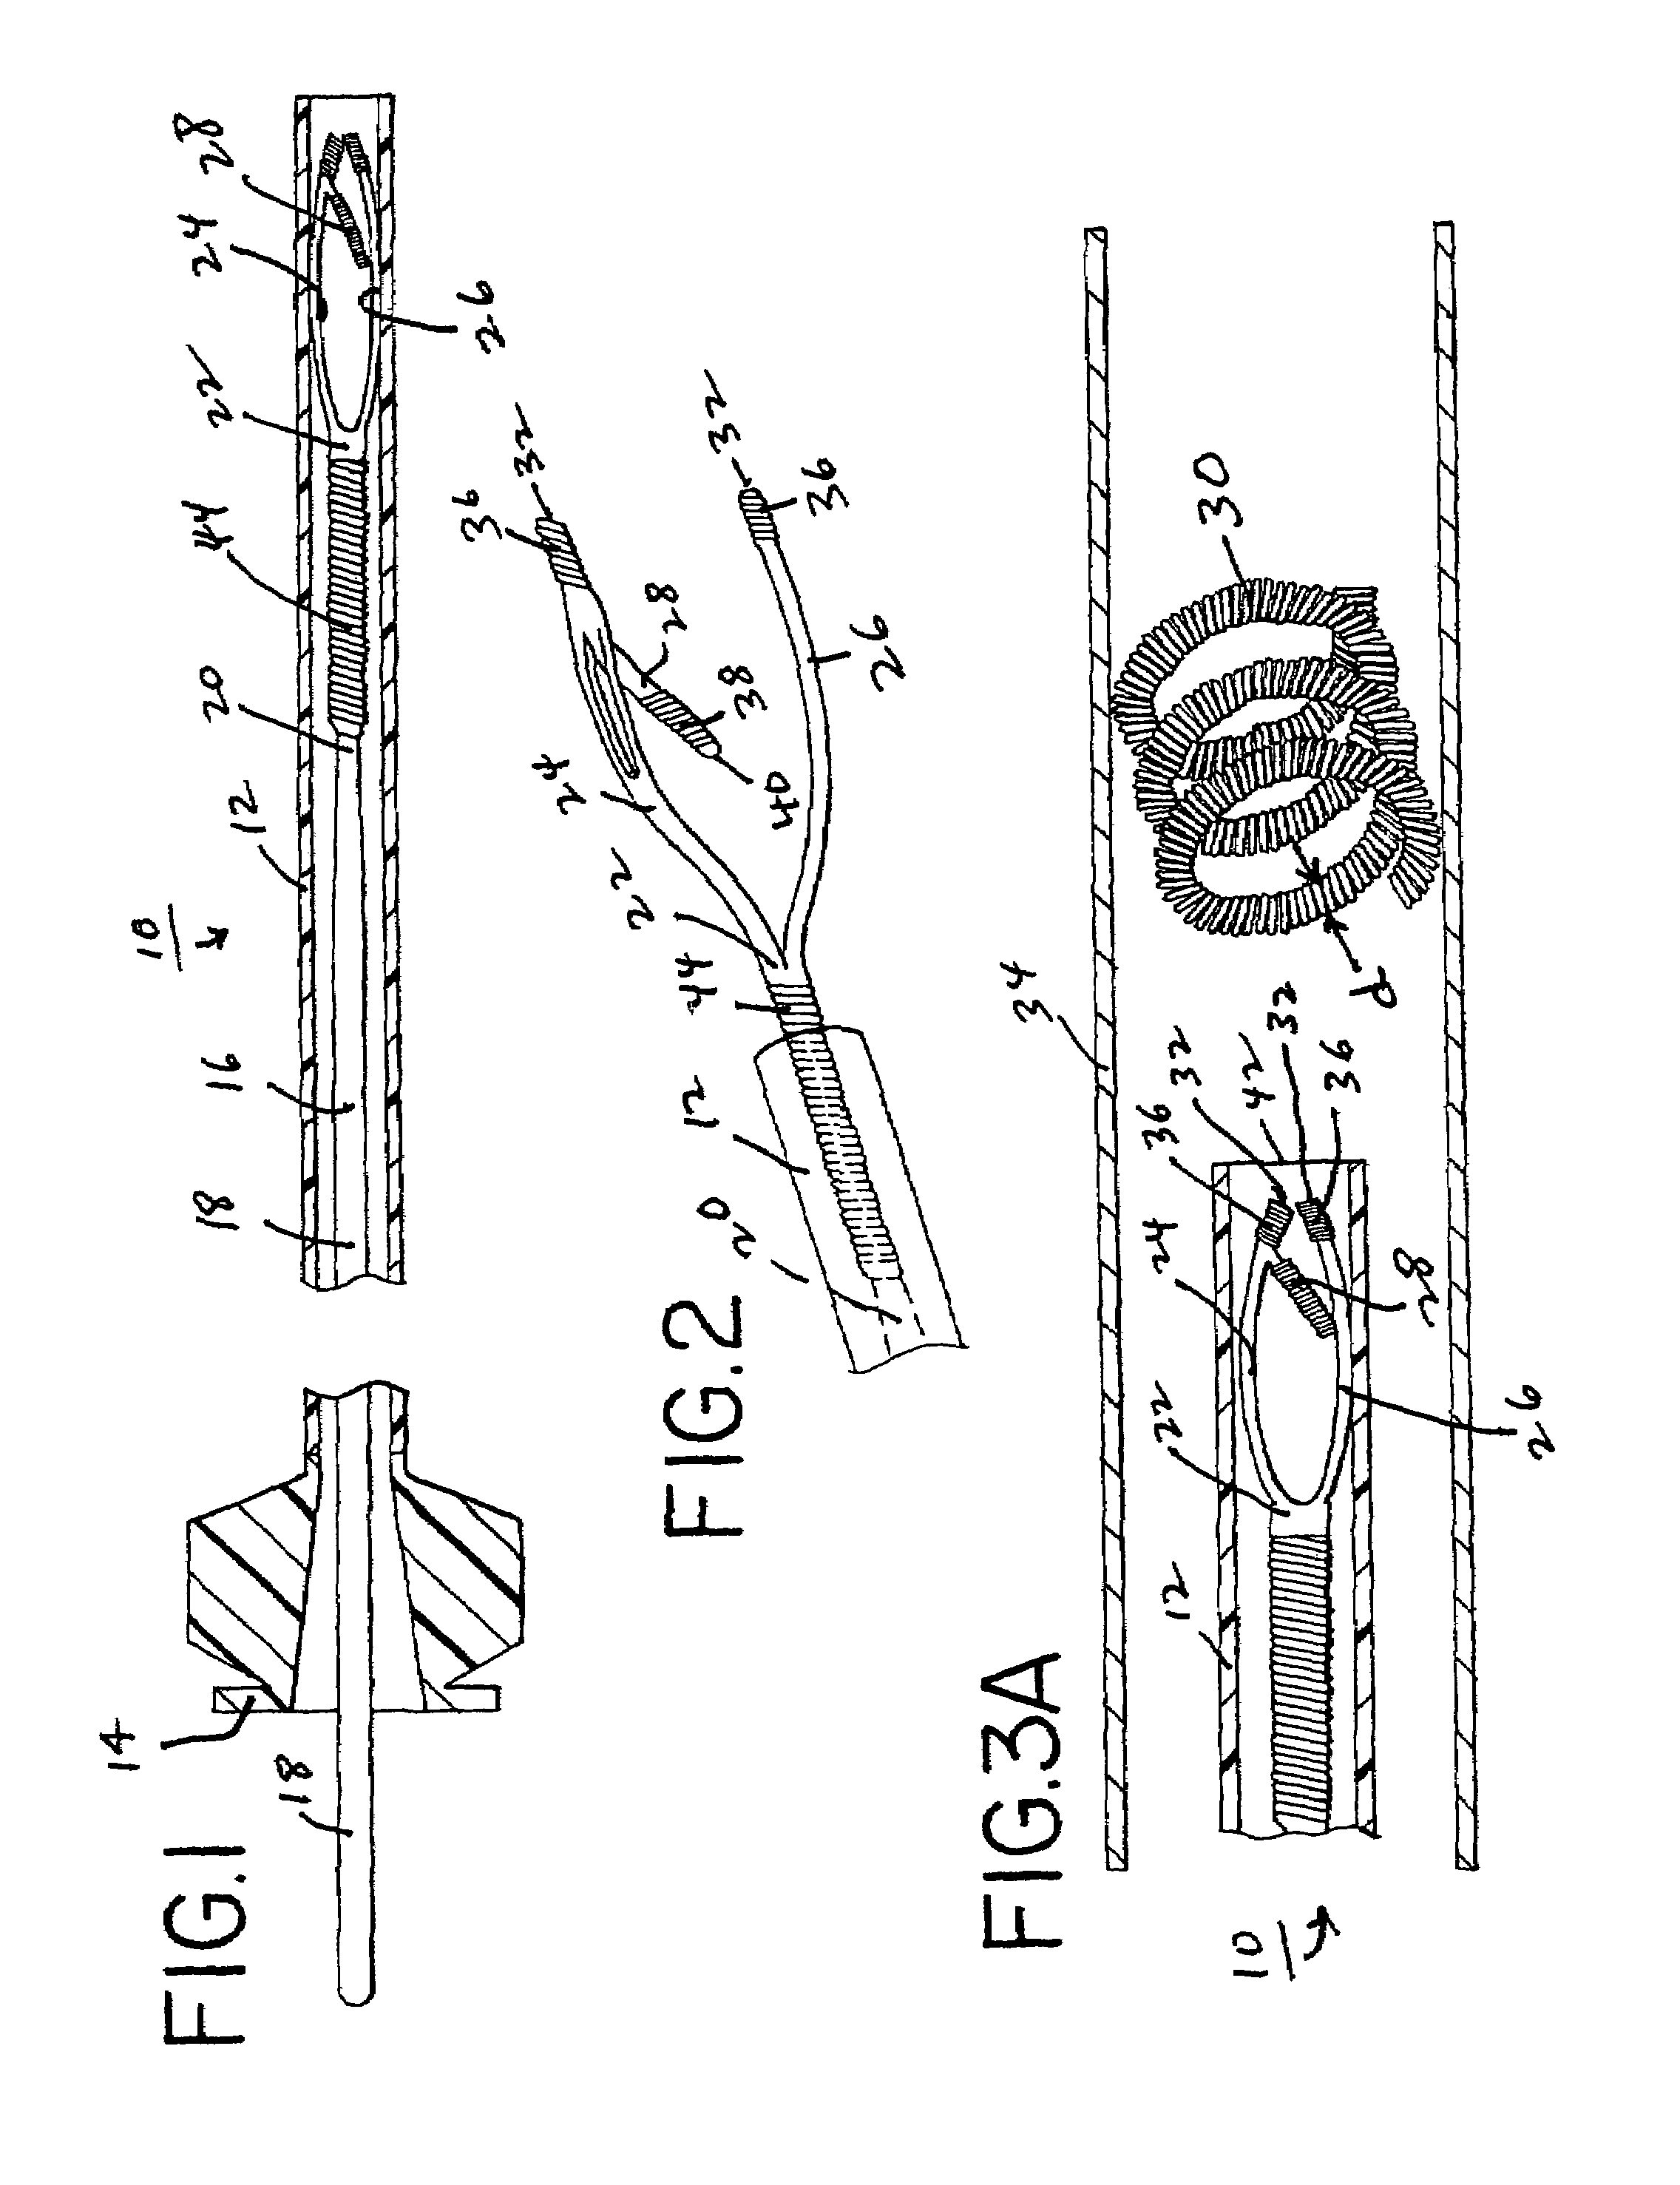 Method and device for retrieving embolic coils